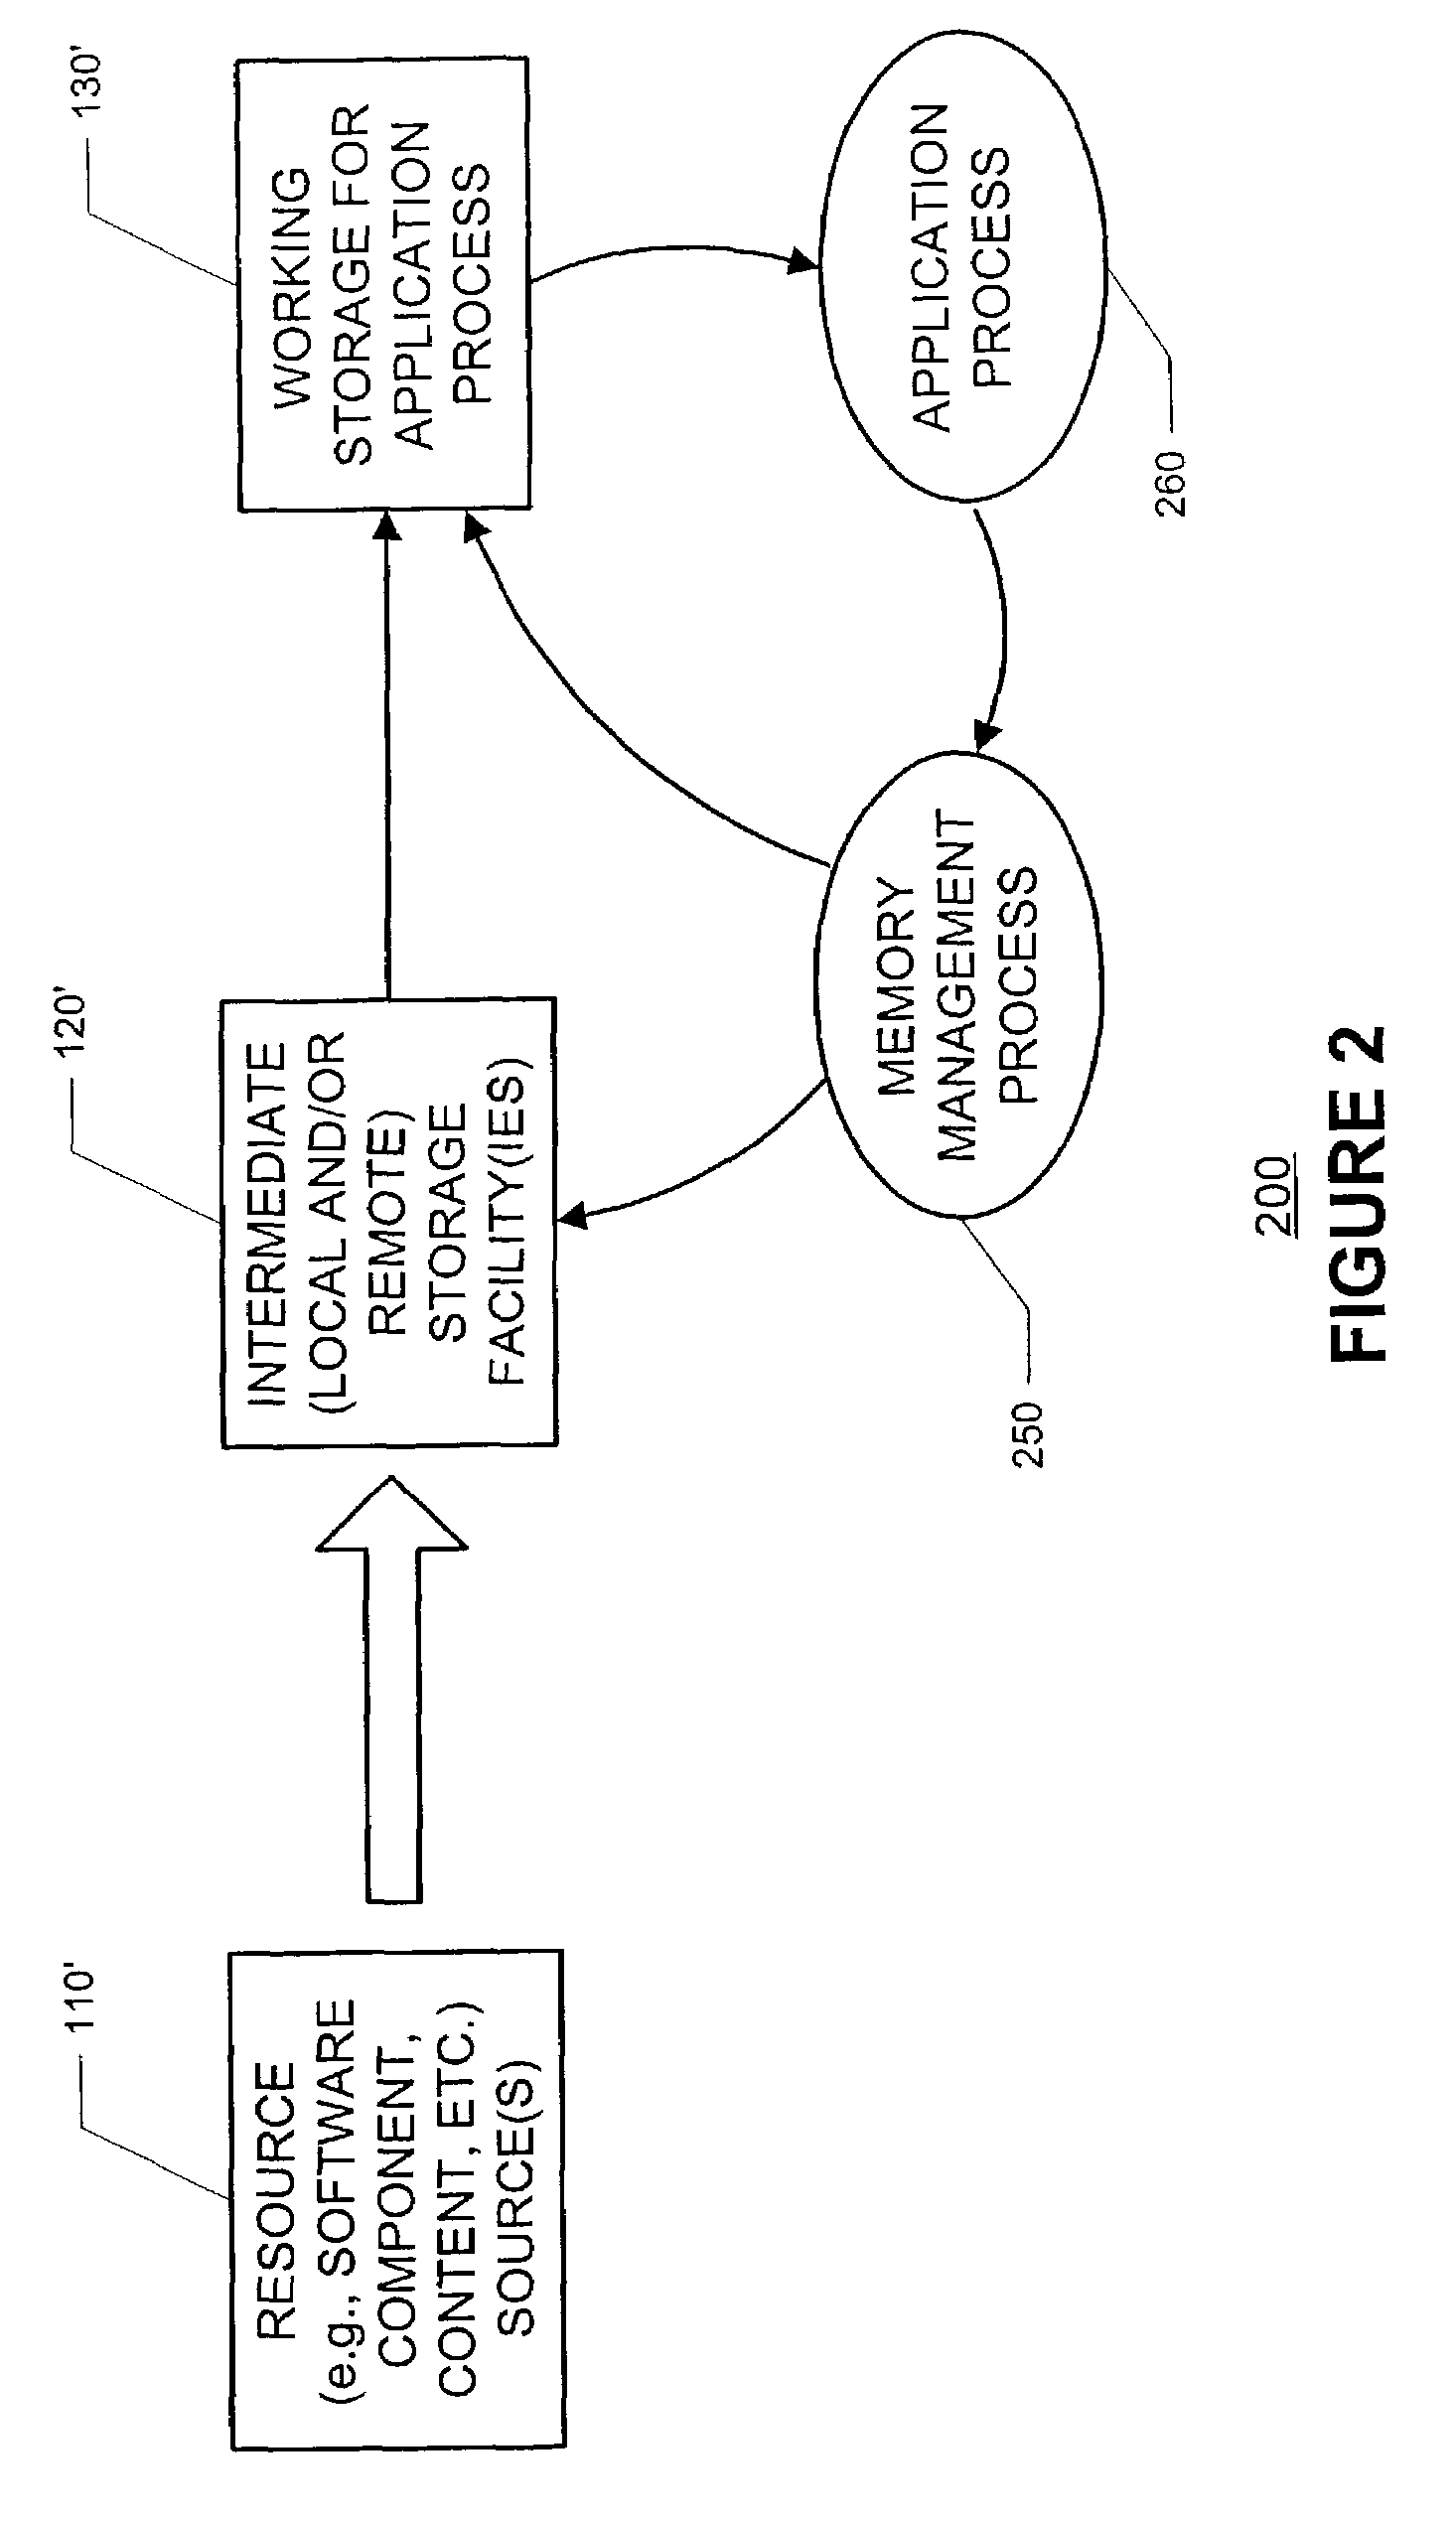 Methods and apparatus for downloading and/or distributing information and/or software resources based on expected utility